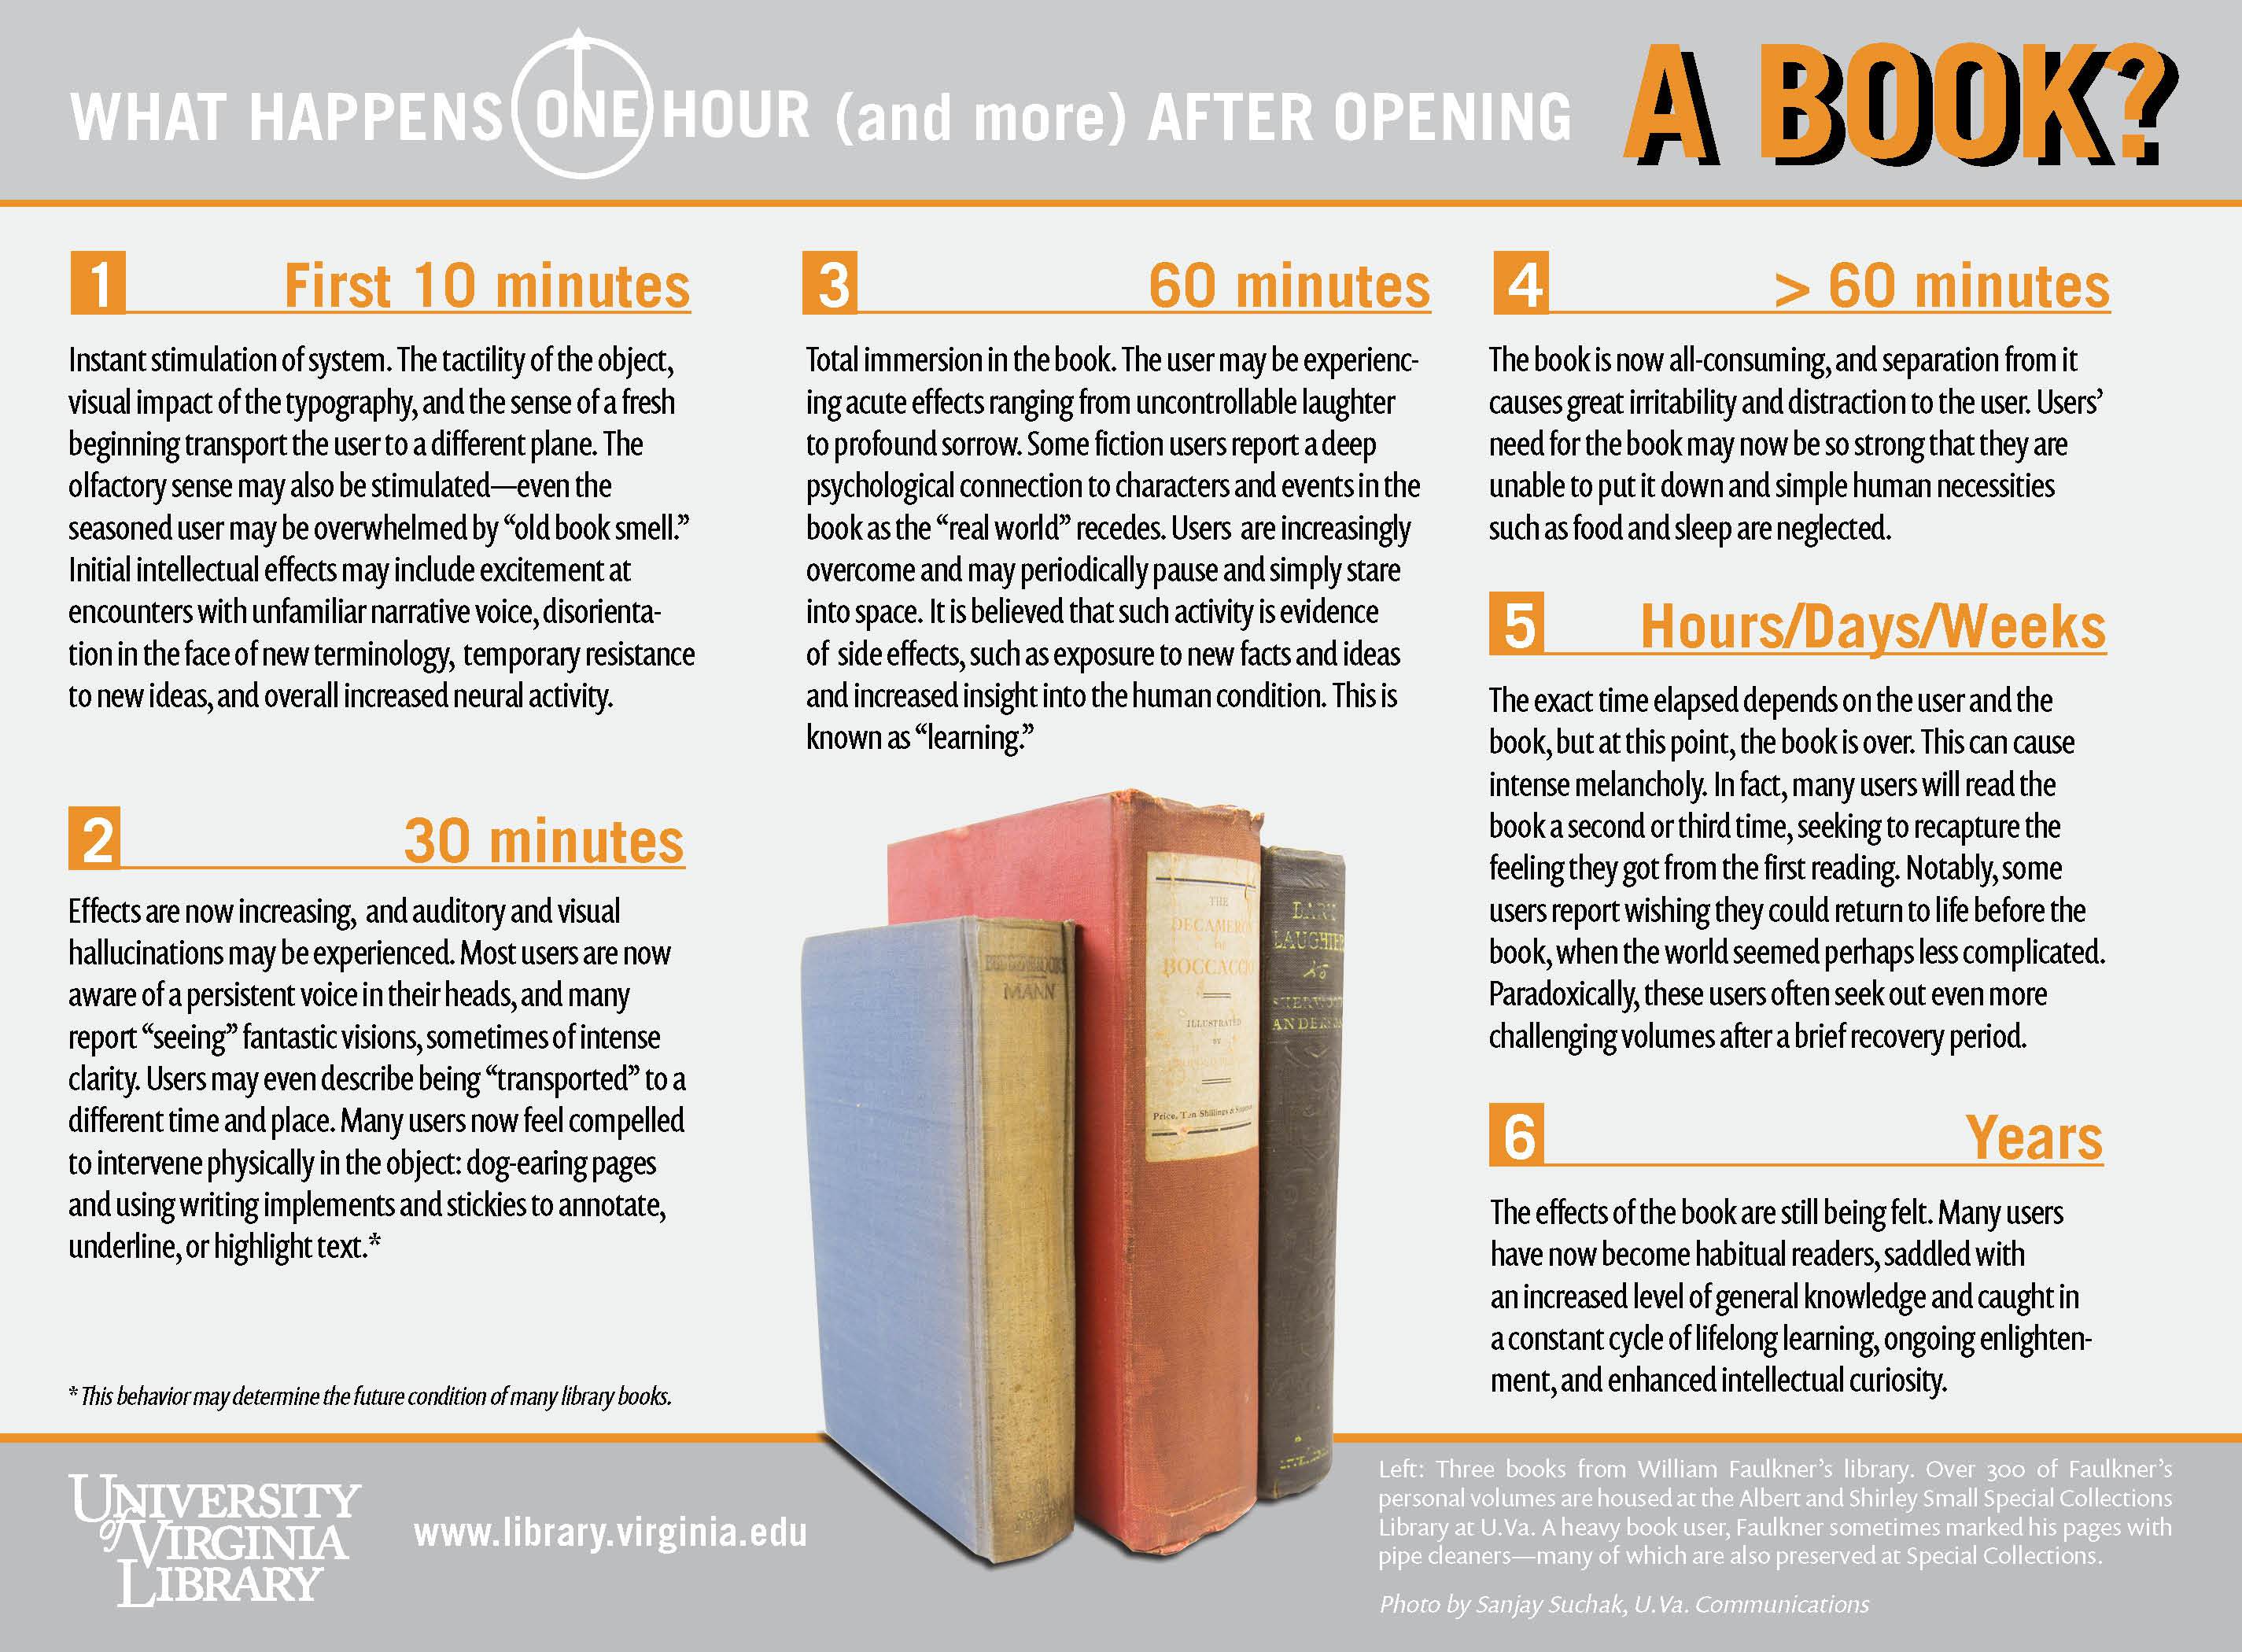 What happens one hour (and more) after opening a book?